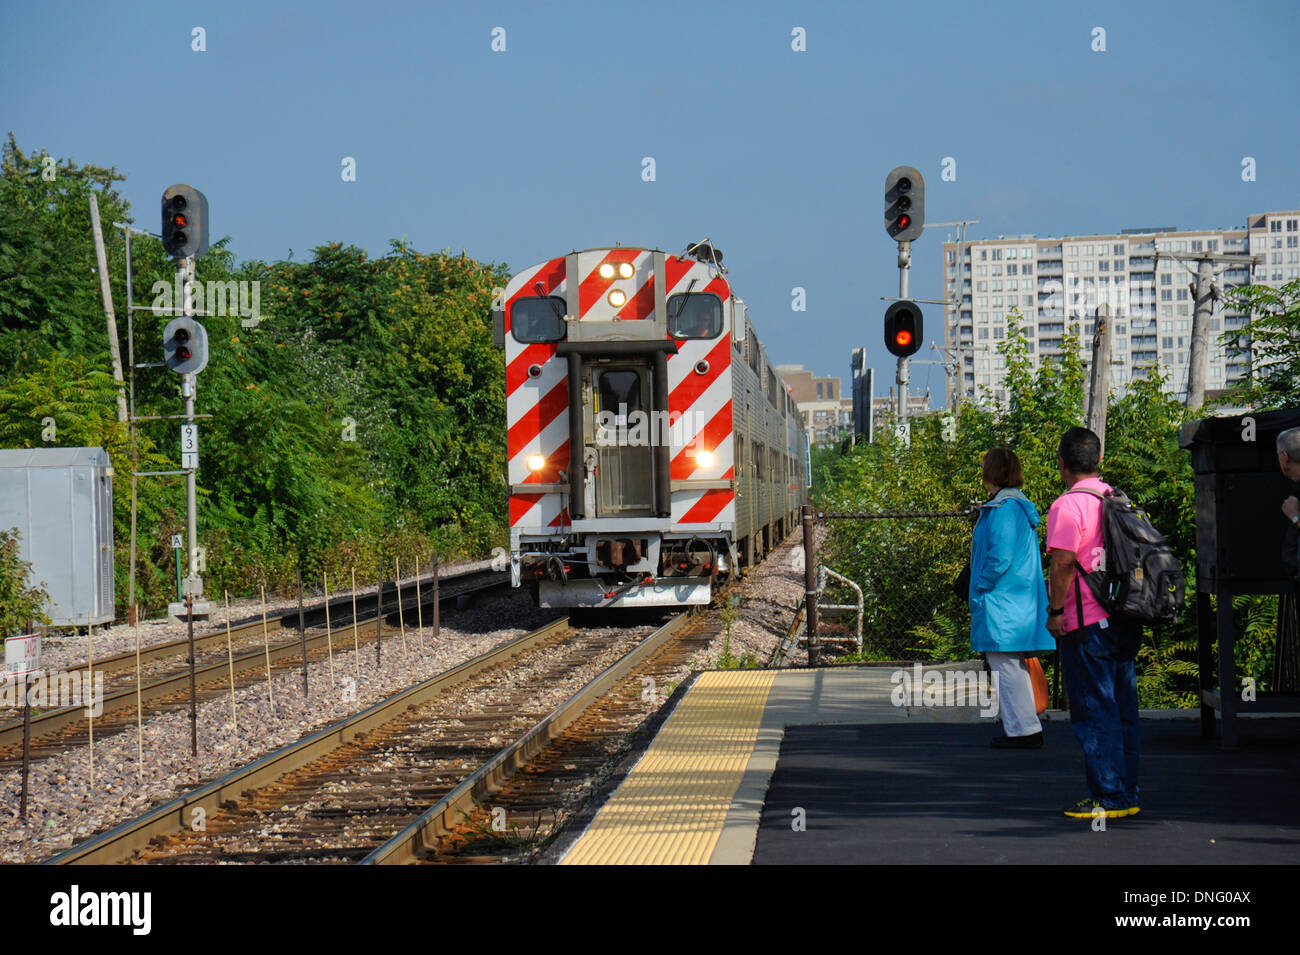 Chicago Metra commuter train at Rogers Park Station, Chicago, IL Stock Photo